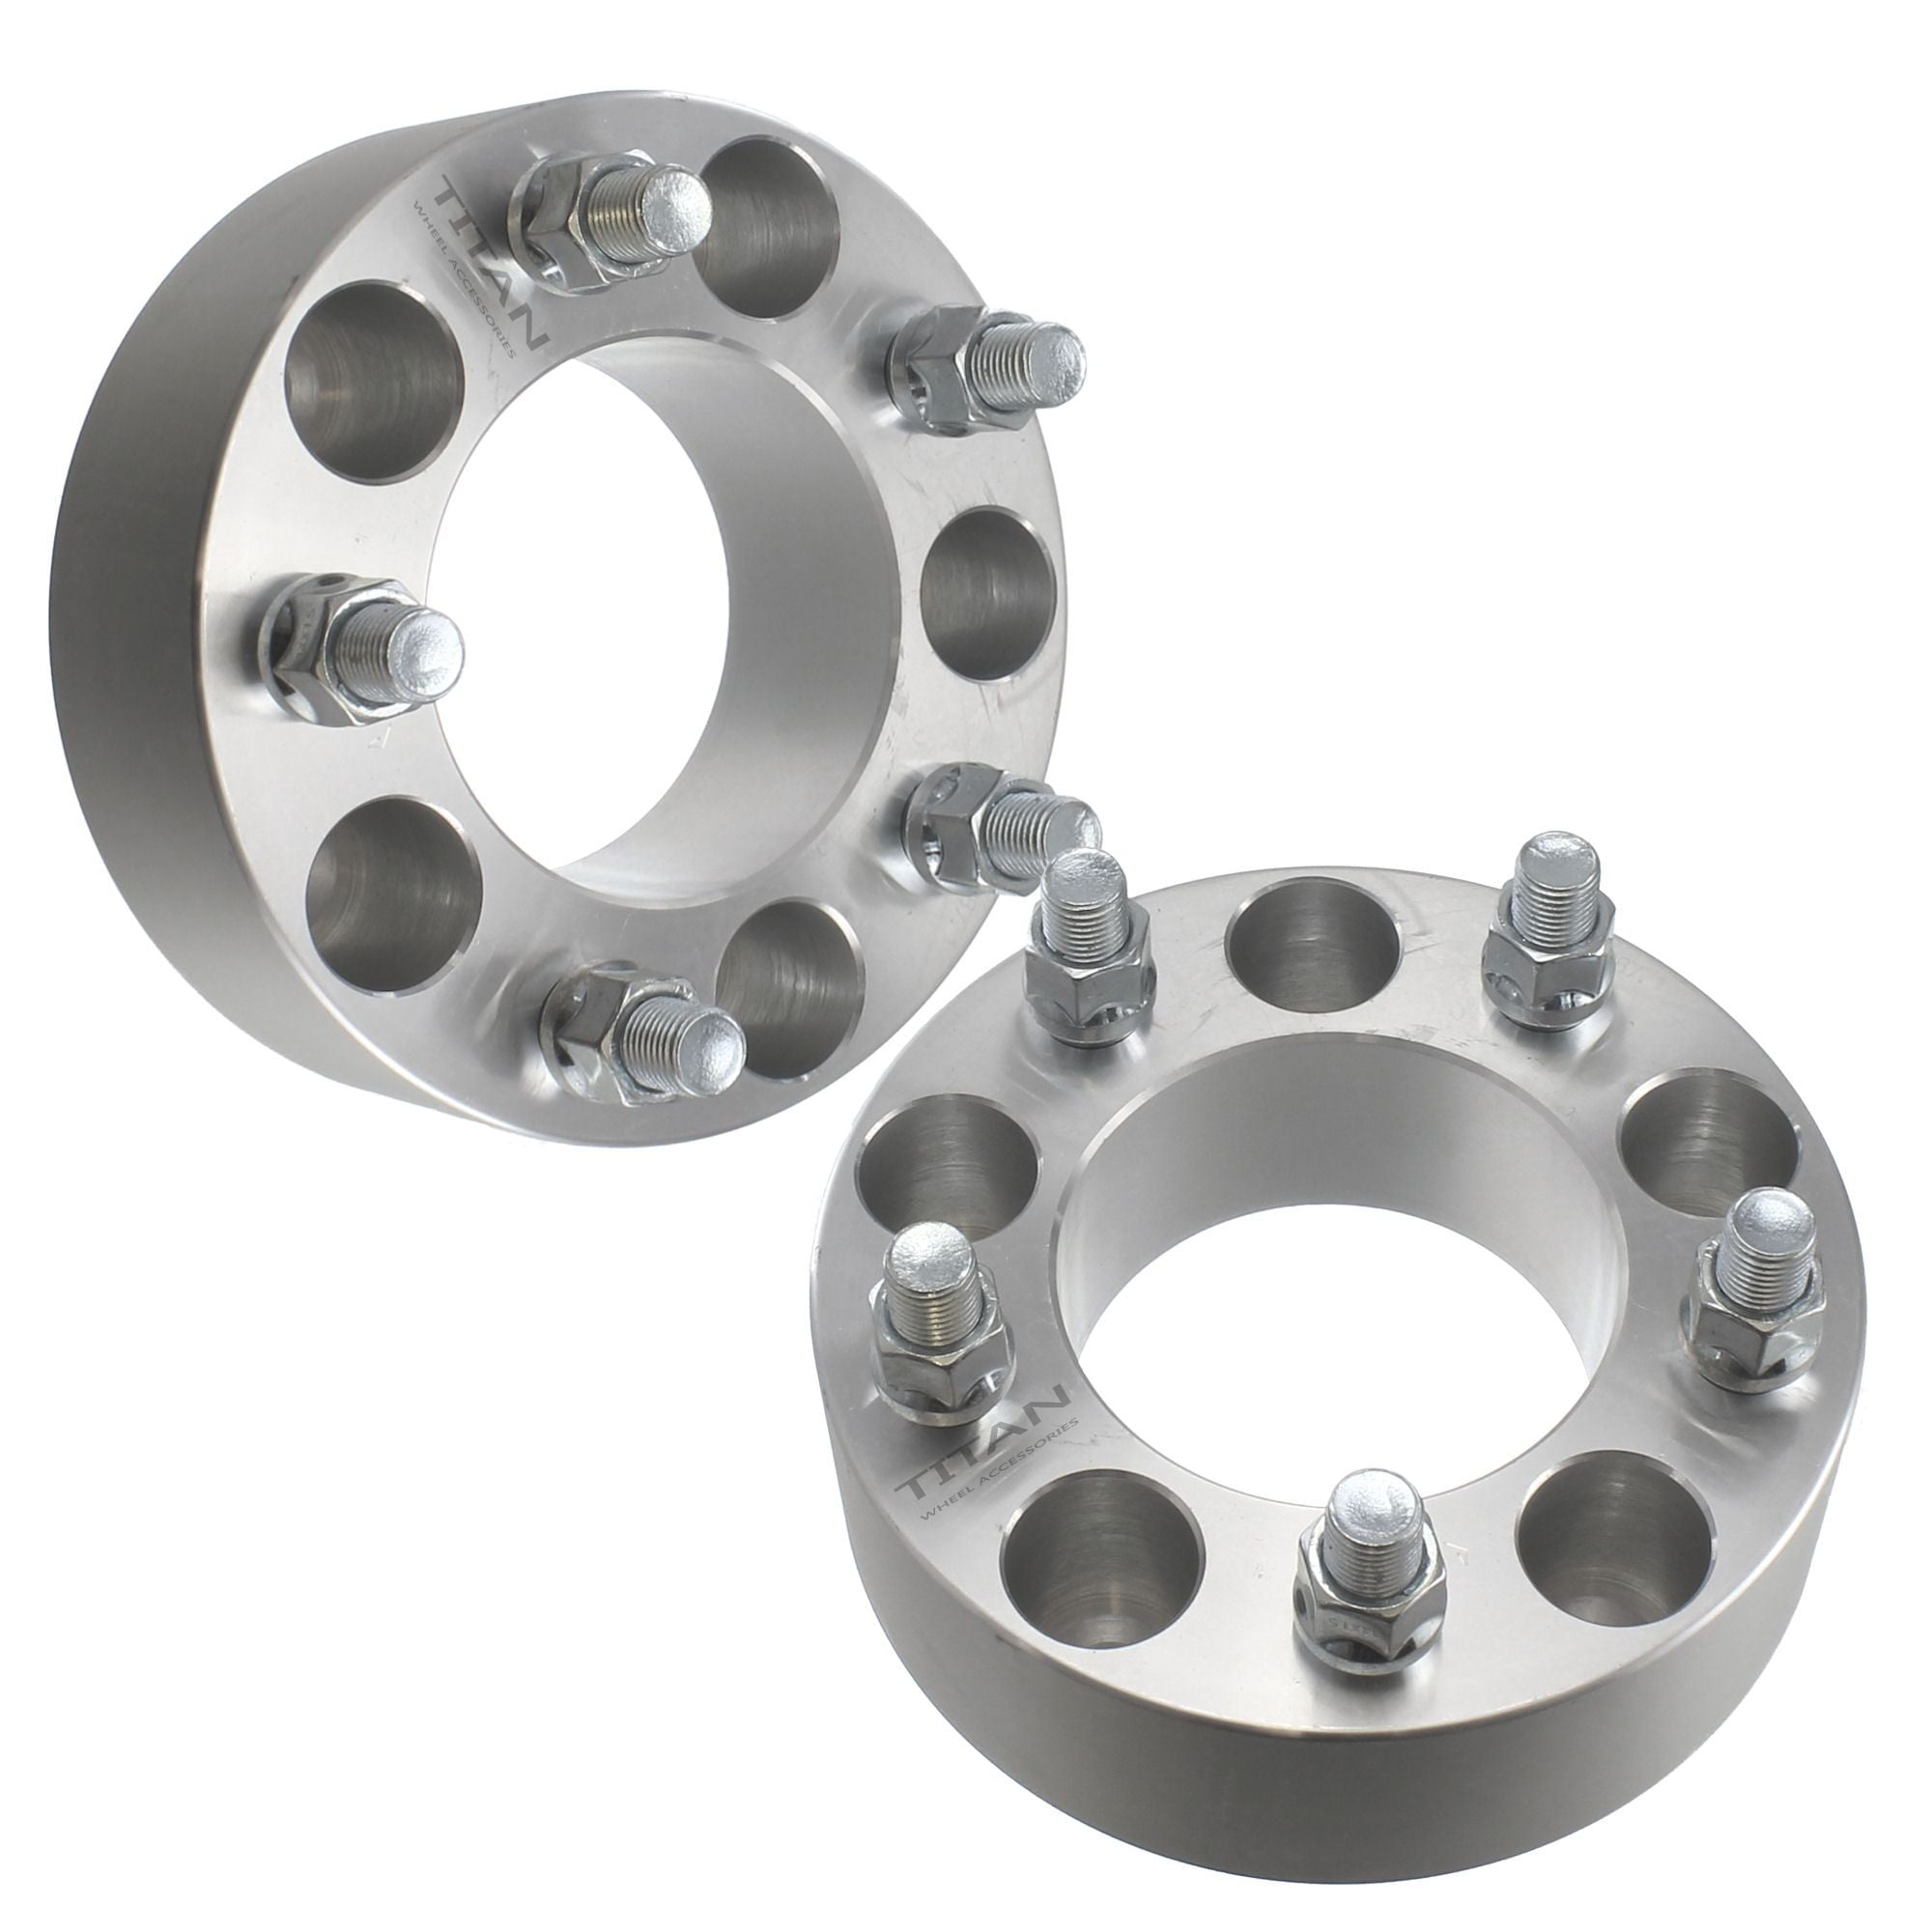 127mm 2 USA MADE 5 x 5" 114.3mm To 5 x 4.5" Wheel Adapters 1" Spacers